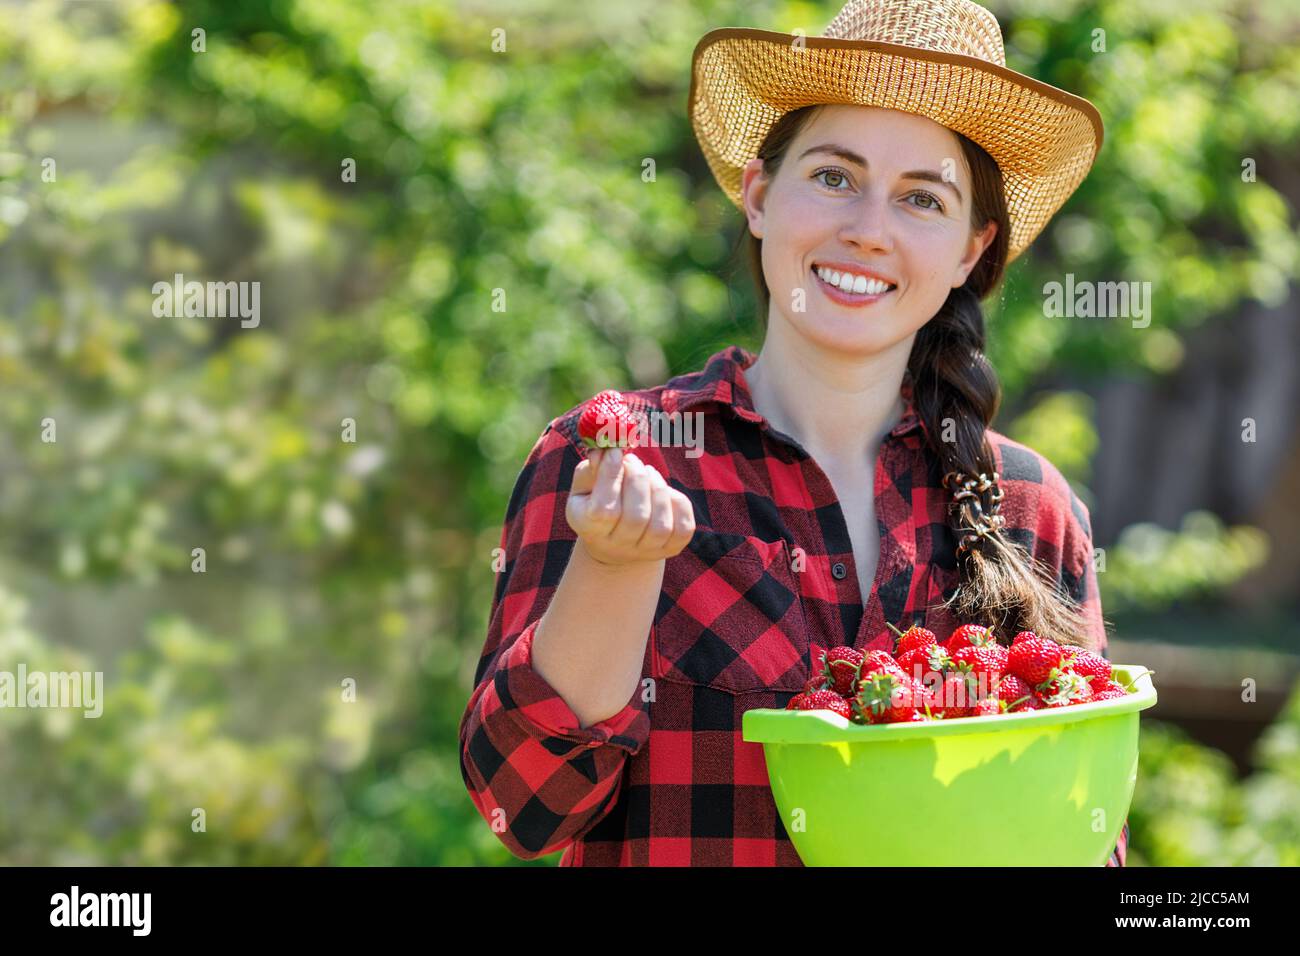 closeup portrait of young smiling woman farmer with strawberries in bowl Stock Photo